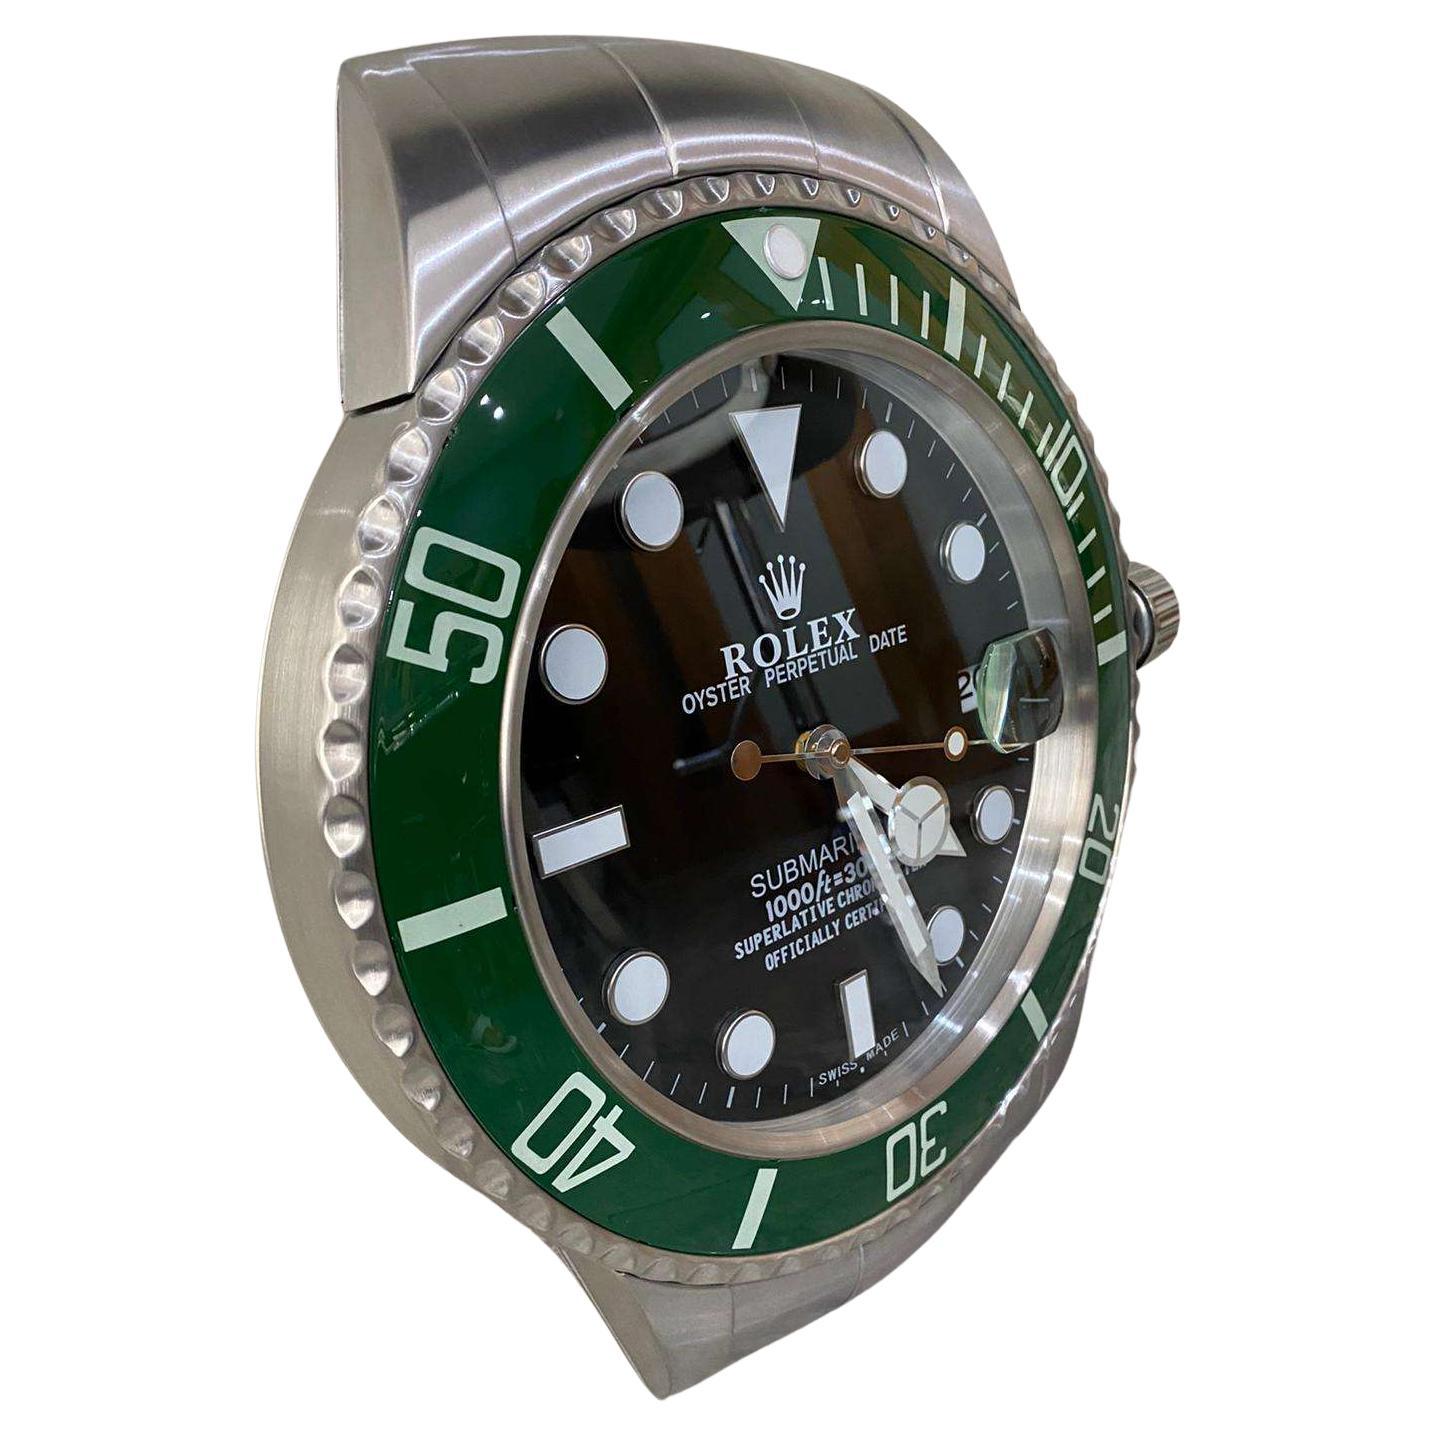 ROLEX Officially Certified Oyster Perpetual Green Submariner Wall Clock  For Sale